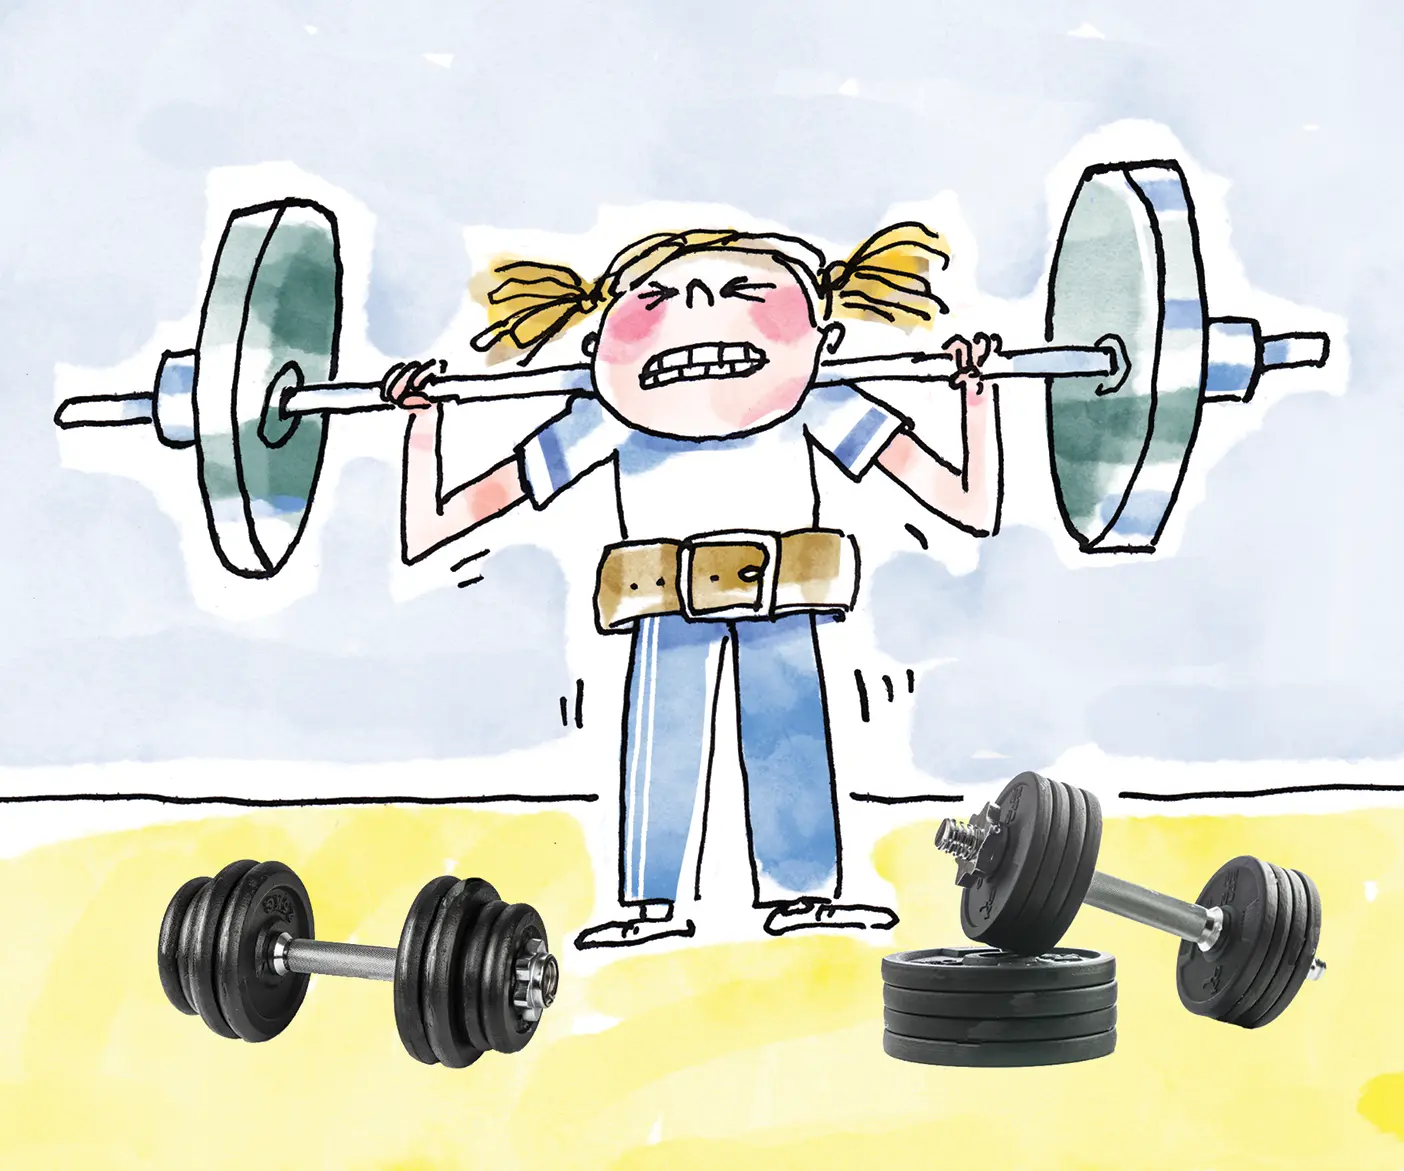 An illustration of a female college student strains to raise a heavy weightlifting barbell. Stacks of dumbbells and weights sit in the foreground.